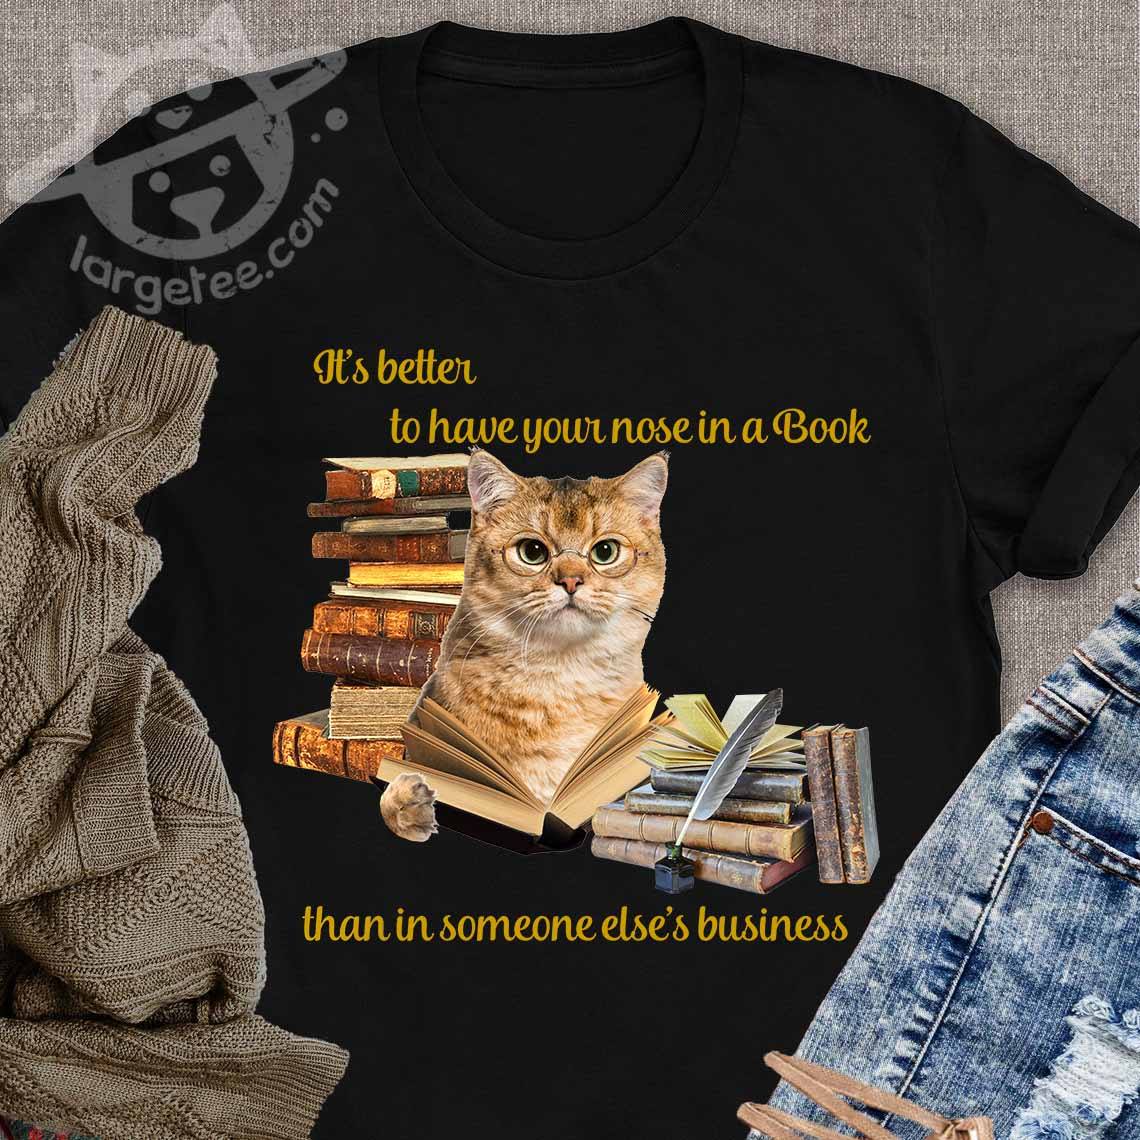 It's better to have your nose in a book than in someone else's business - Cat and book